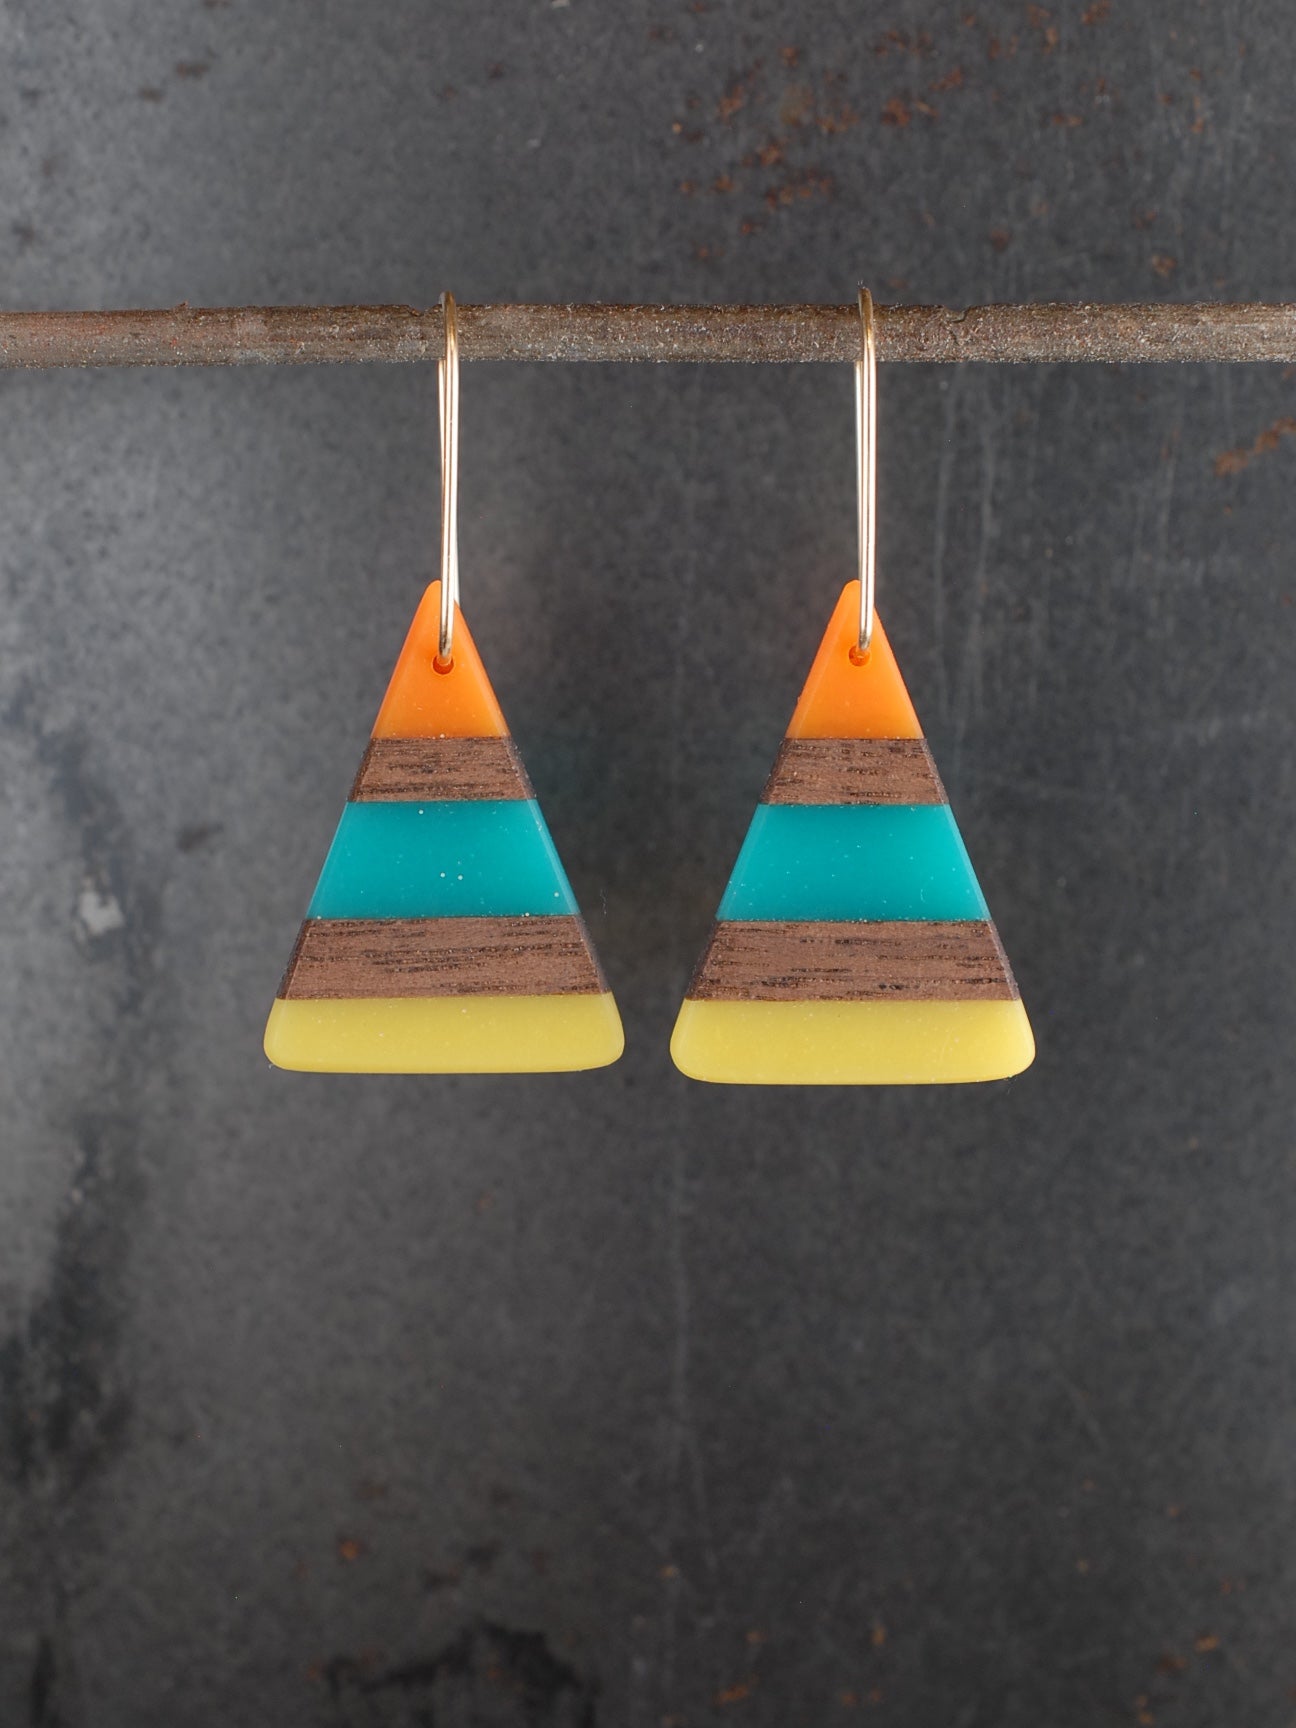 Lani Earrings - Everyday-elegant earrings are hand painted in radiant  sunset hues with a native floral motif. – Holly Yashi